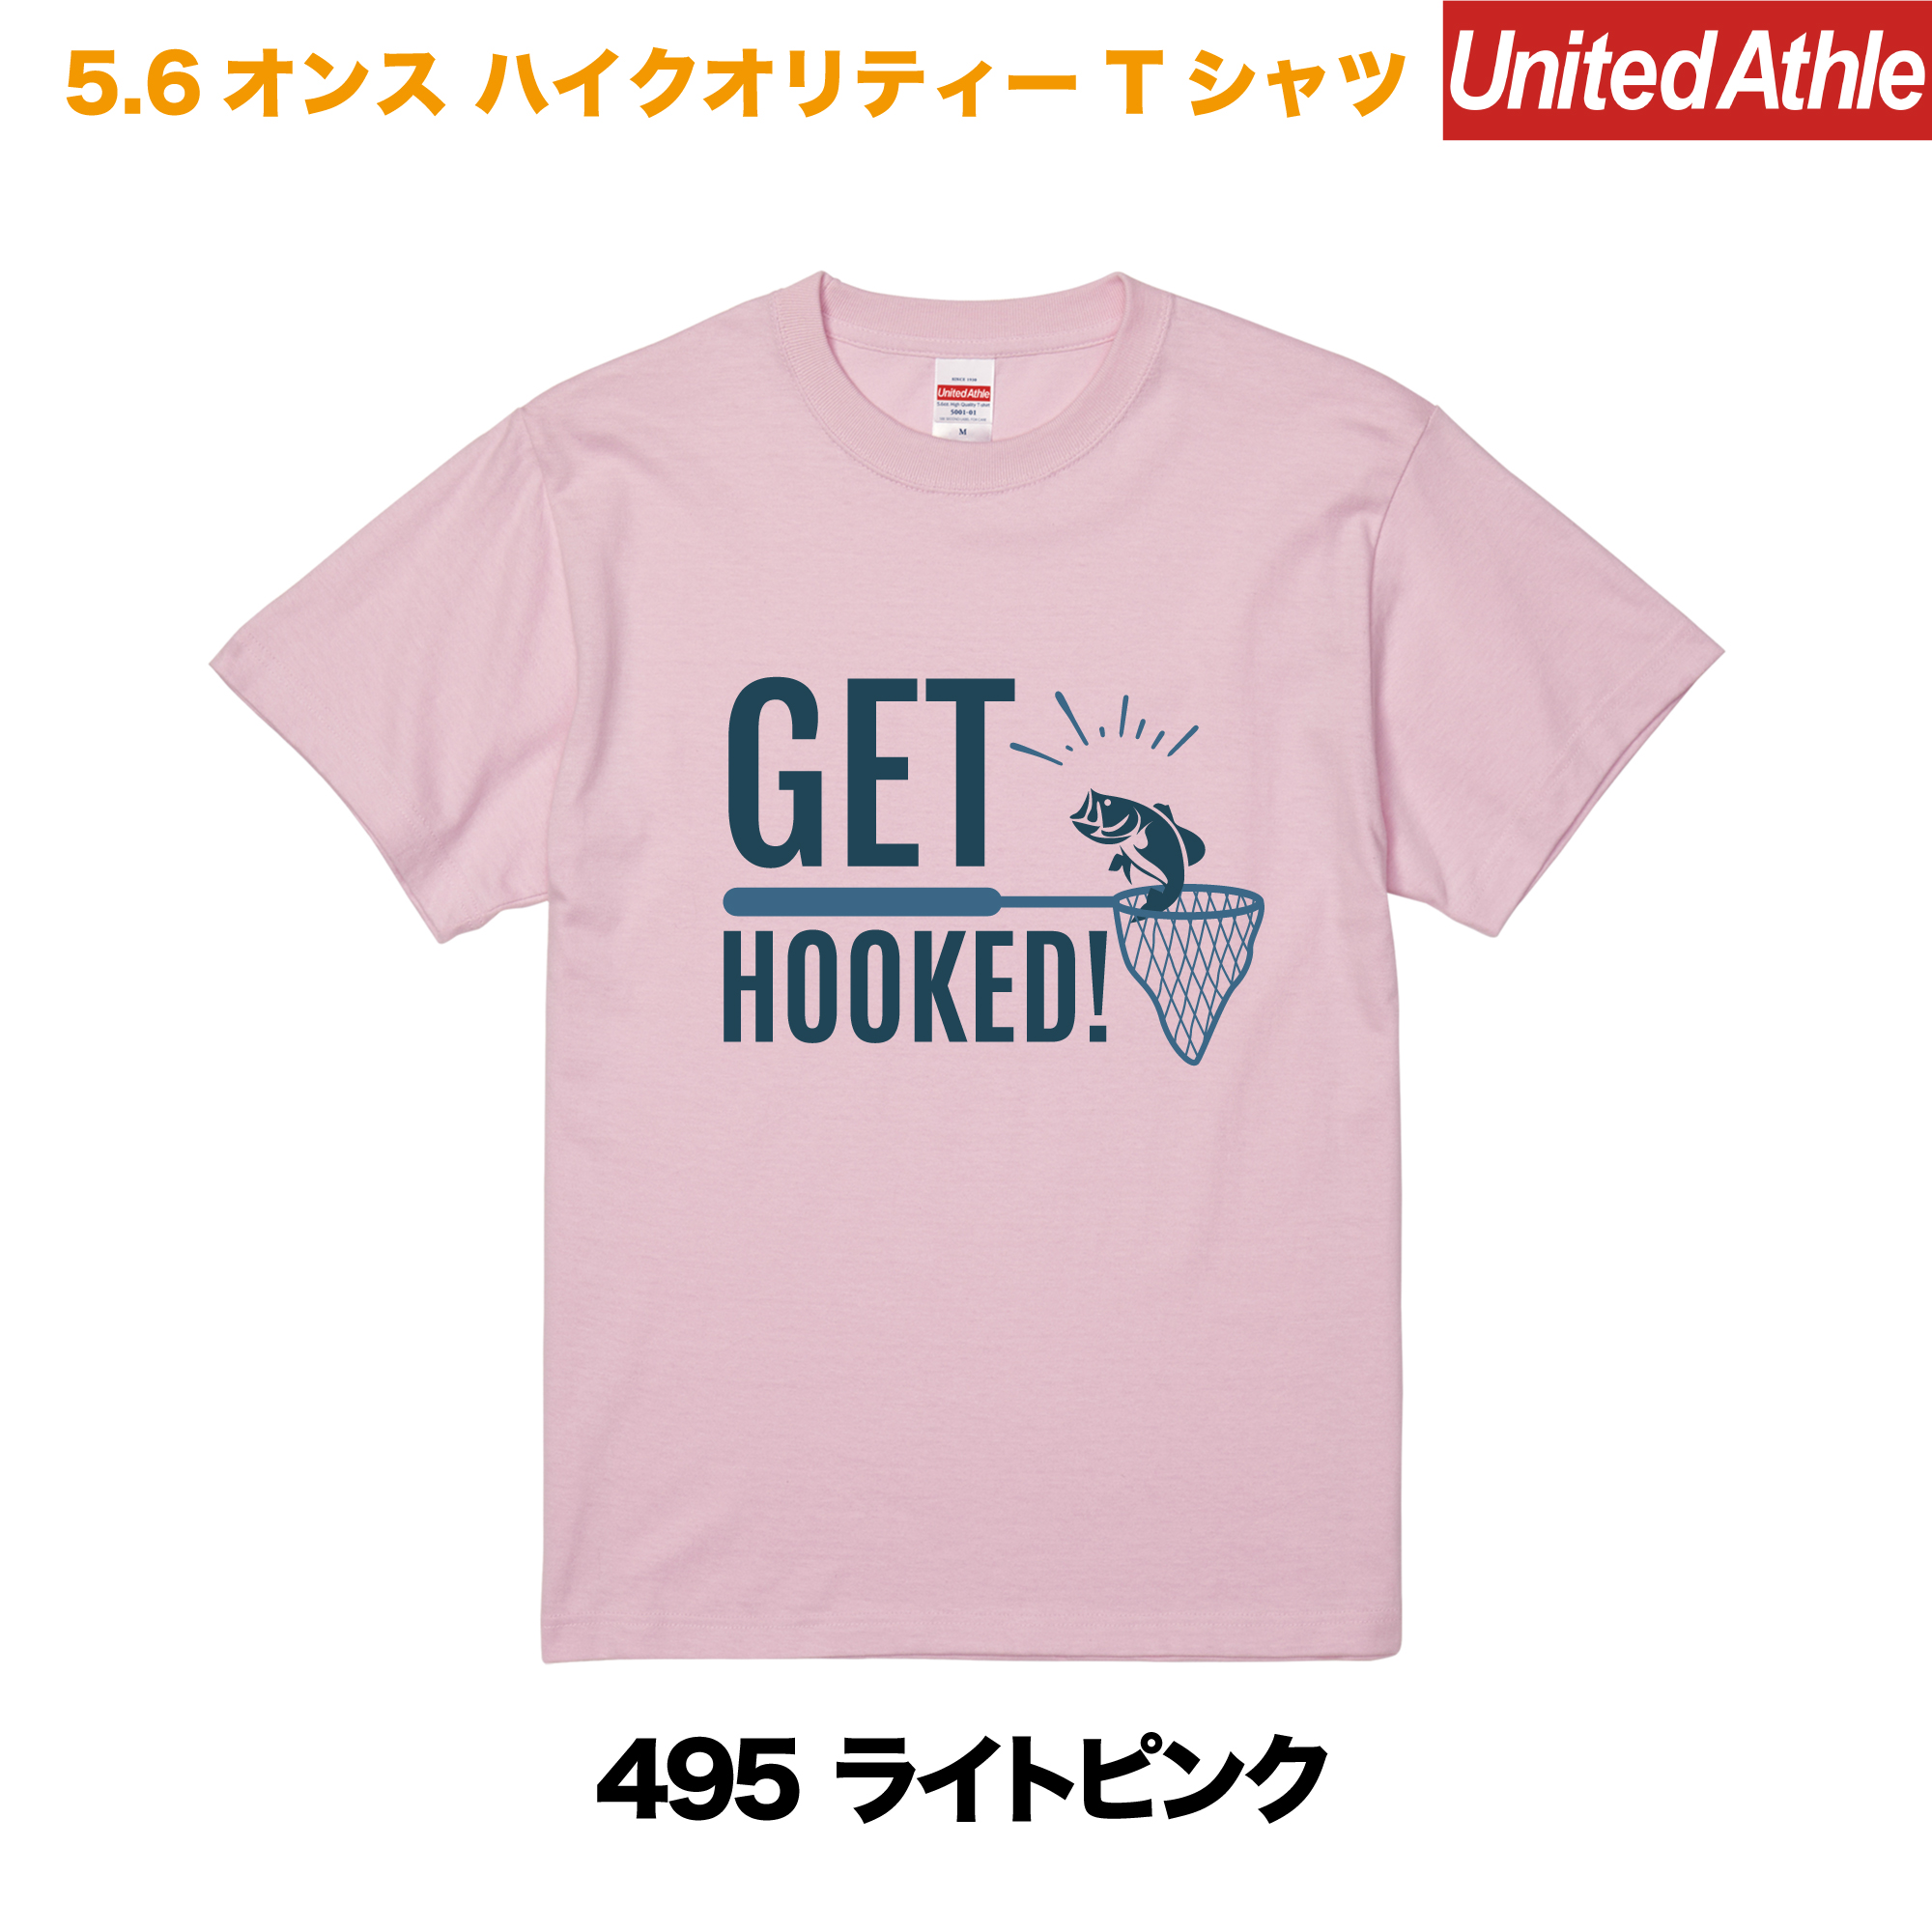 GET HOOKED　プリントTシャツ　5001-01【ライトピンク】＜アダルト＞